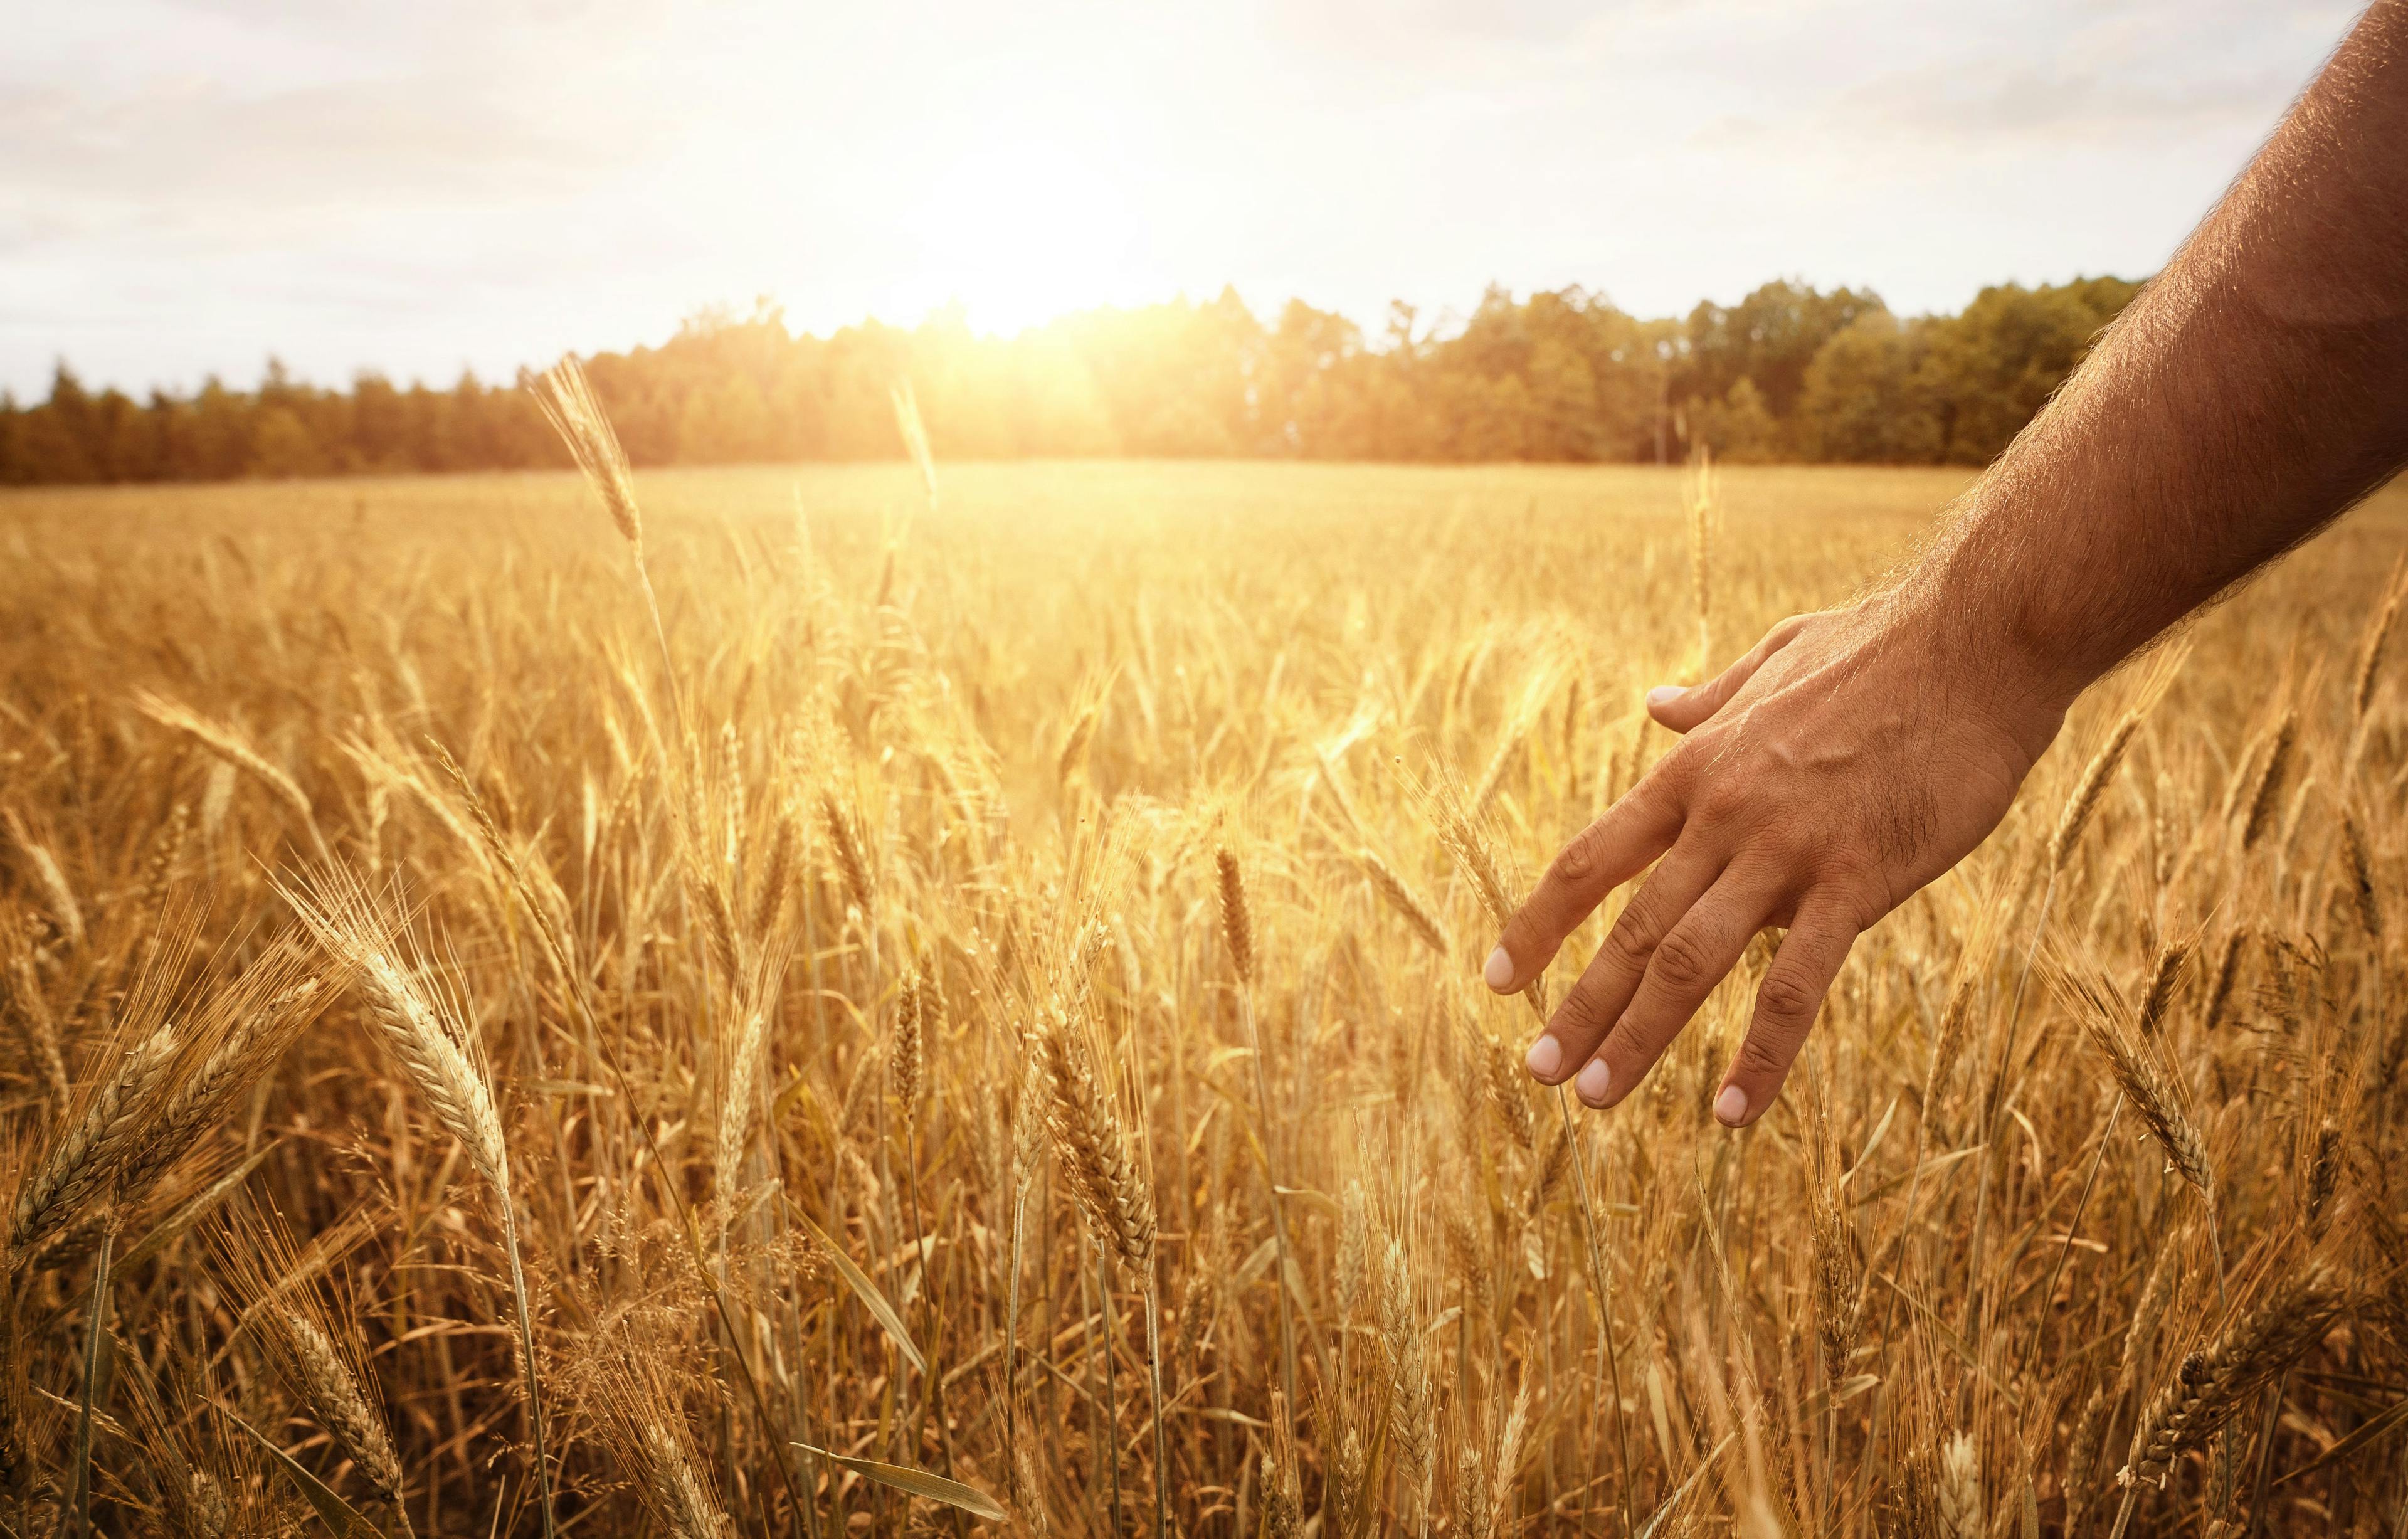 Harvest concept, close up of male hand in the wheat field with copy space | Image Credit: © rangizzz - stock.adobe.com.